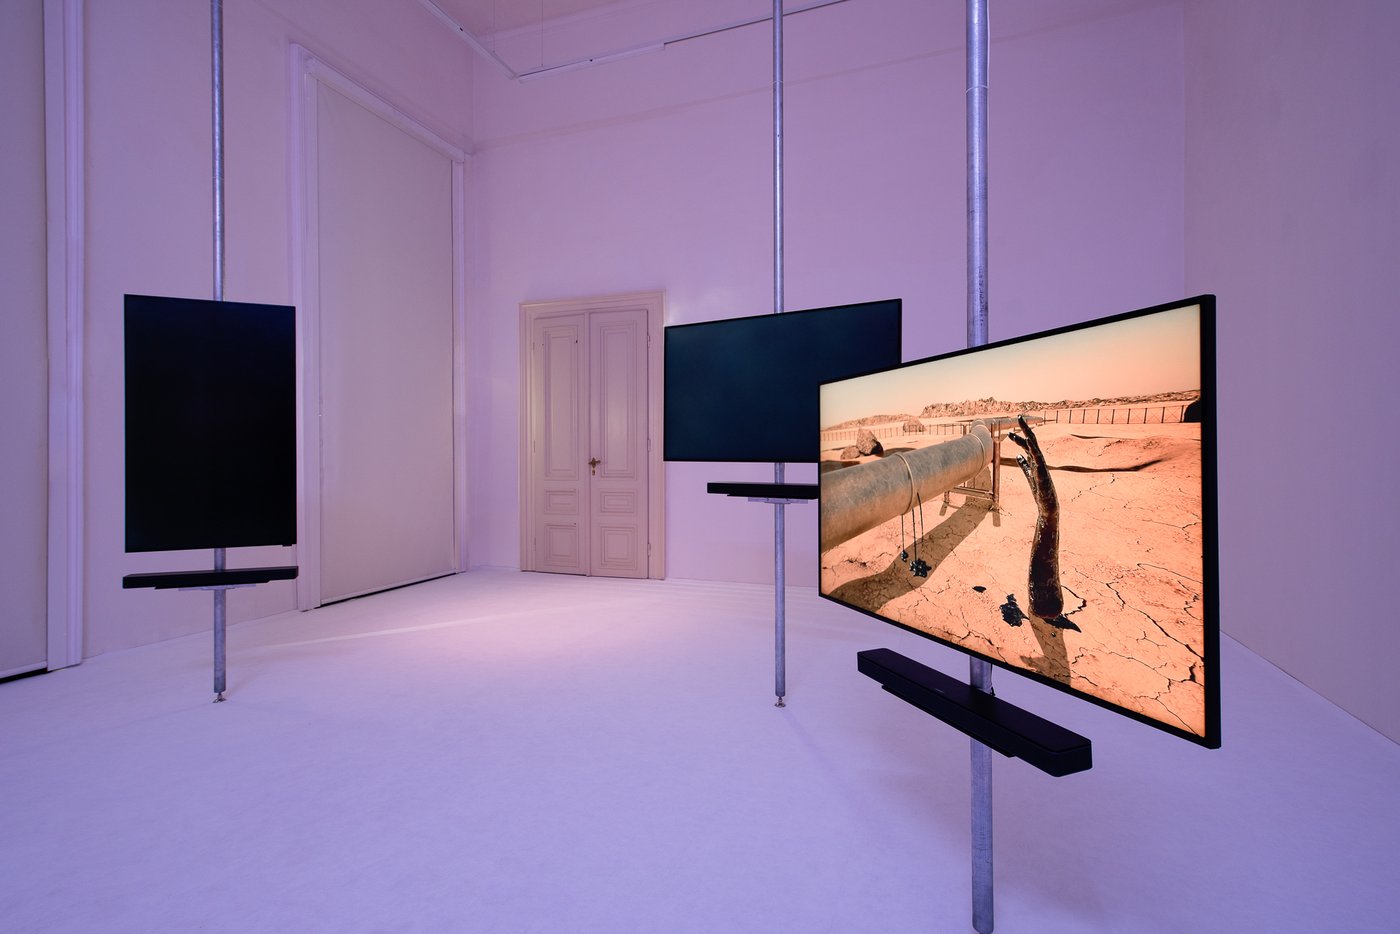 white room with three screens mounted on poles and distributed in the room, two screens are black, on the third one there is a picture of a desert landscape with steel pipes and a black oily hand sticking out of the floor, in the background there is a white door